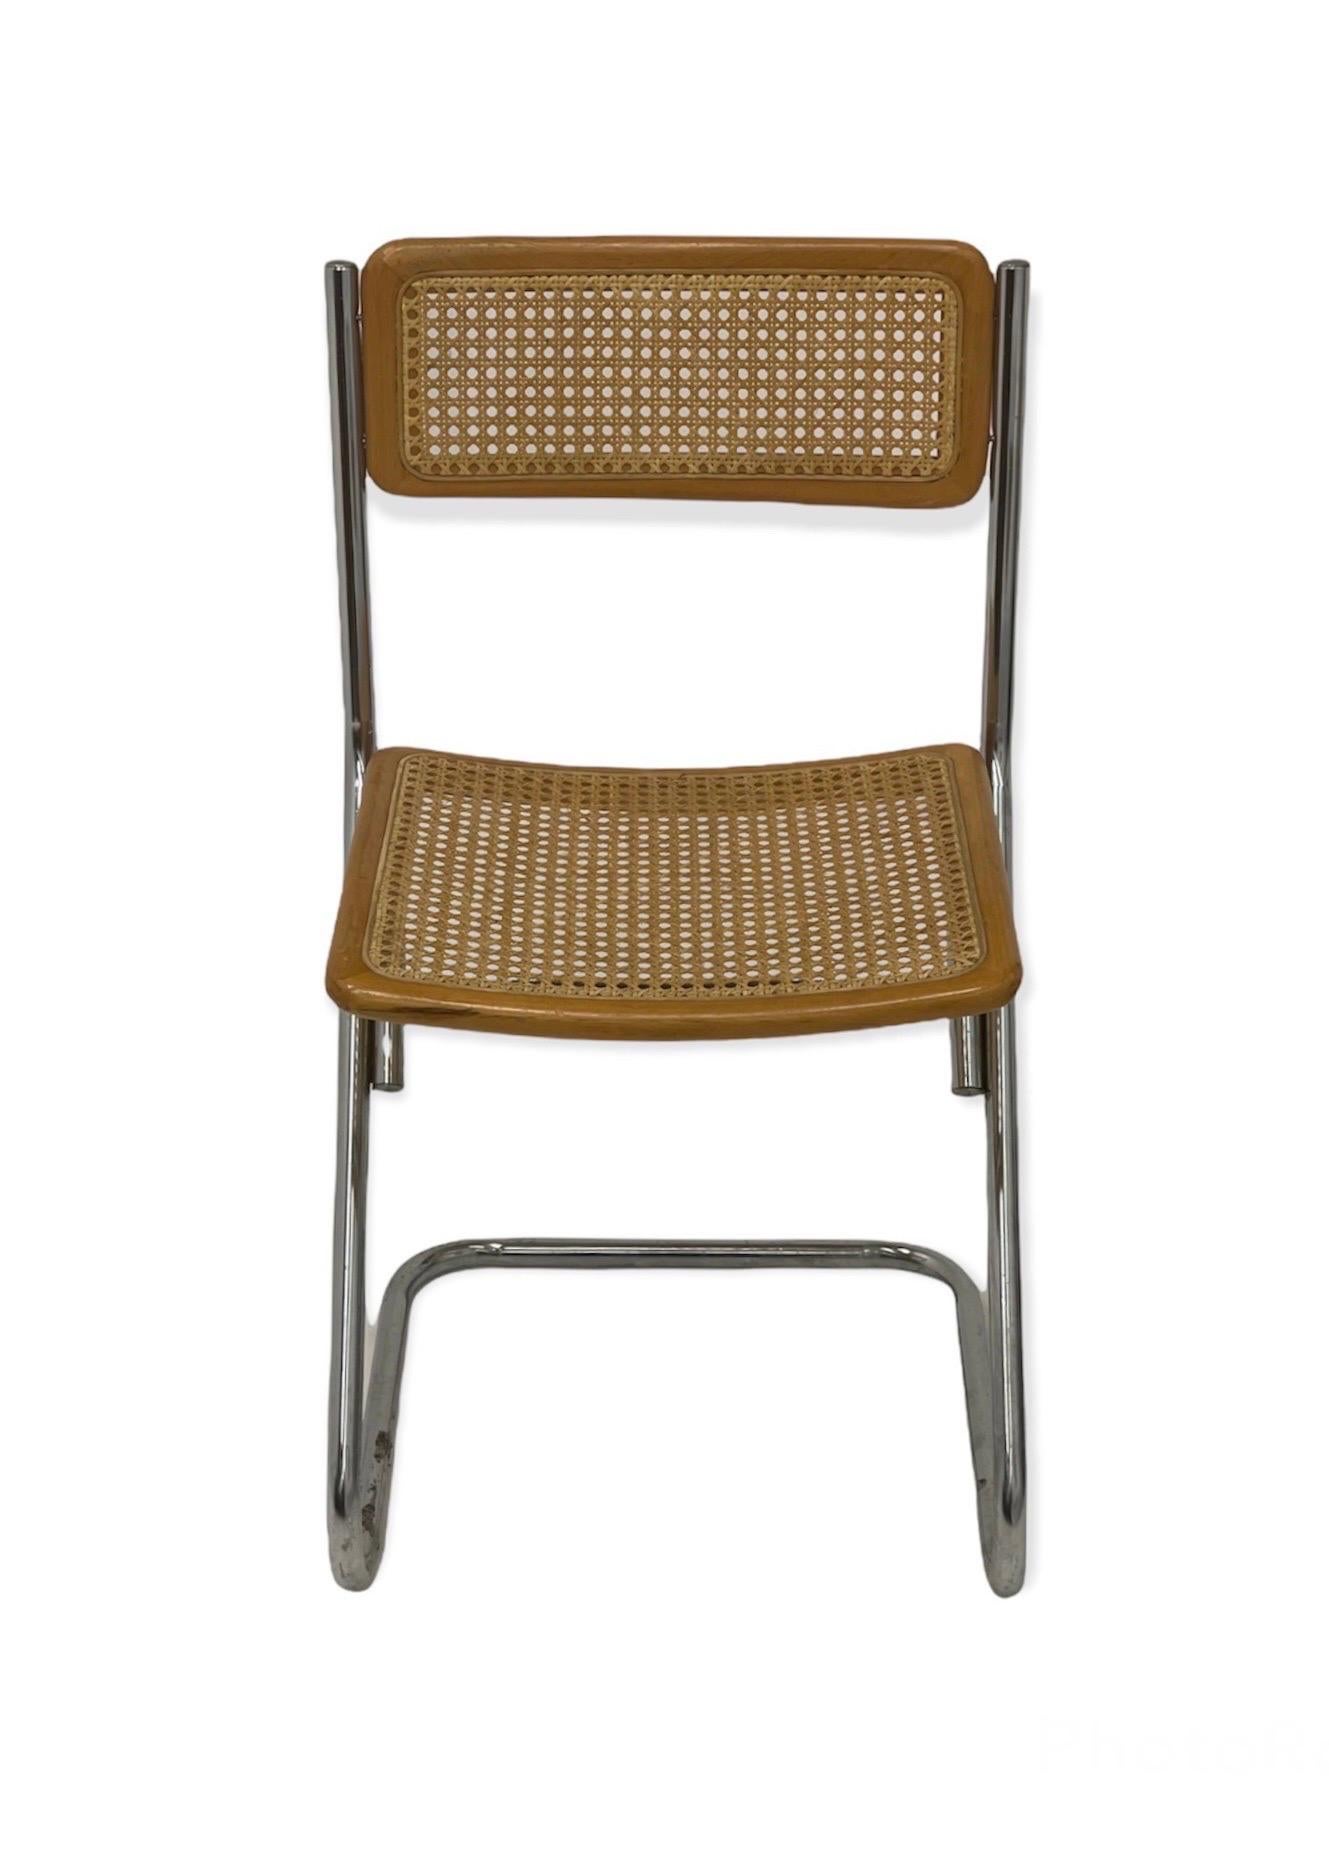 Vintage Cane Metal Chair . Cane is Good Condition.

Dimensions. 18 W ; 17 D ; 32 H

Seat Height. 19
